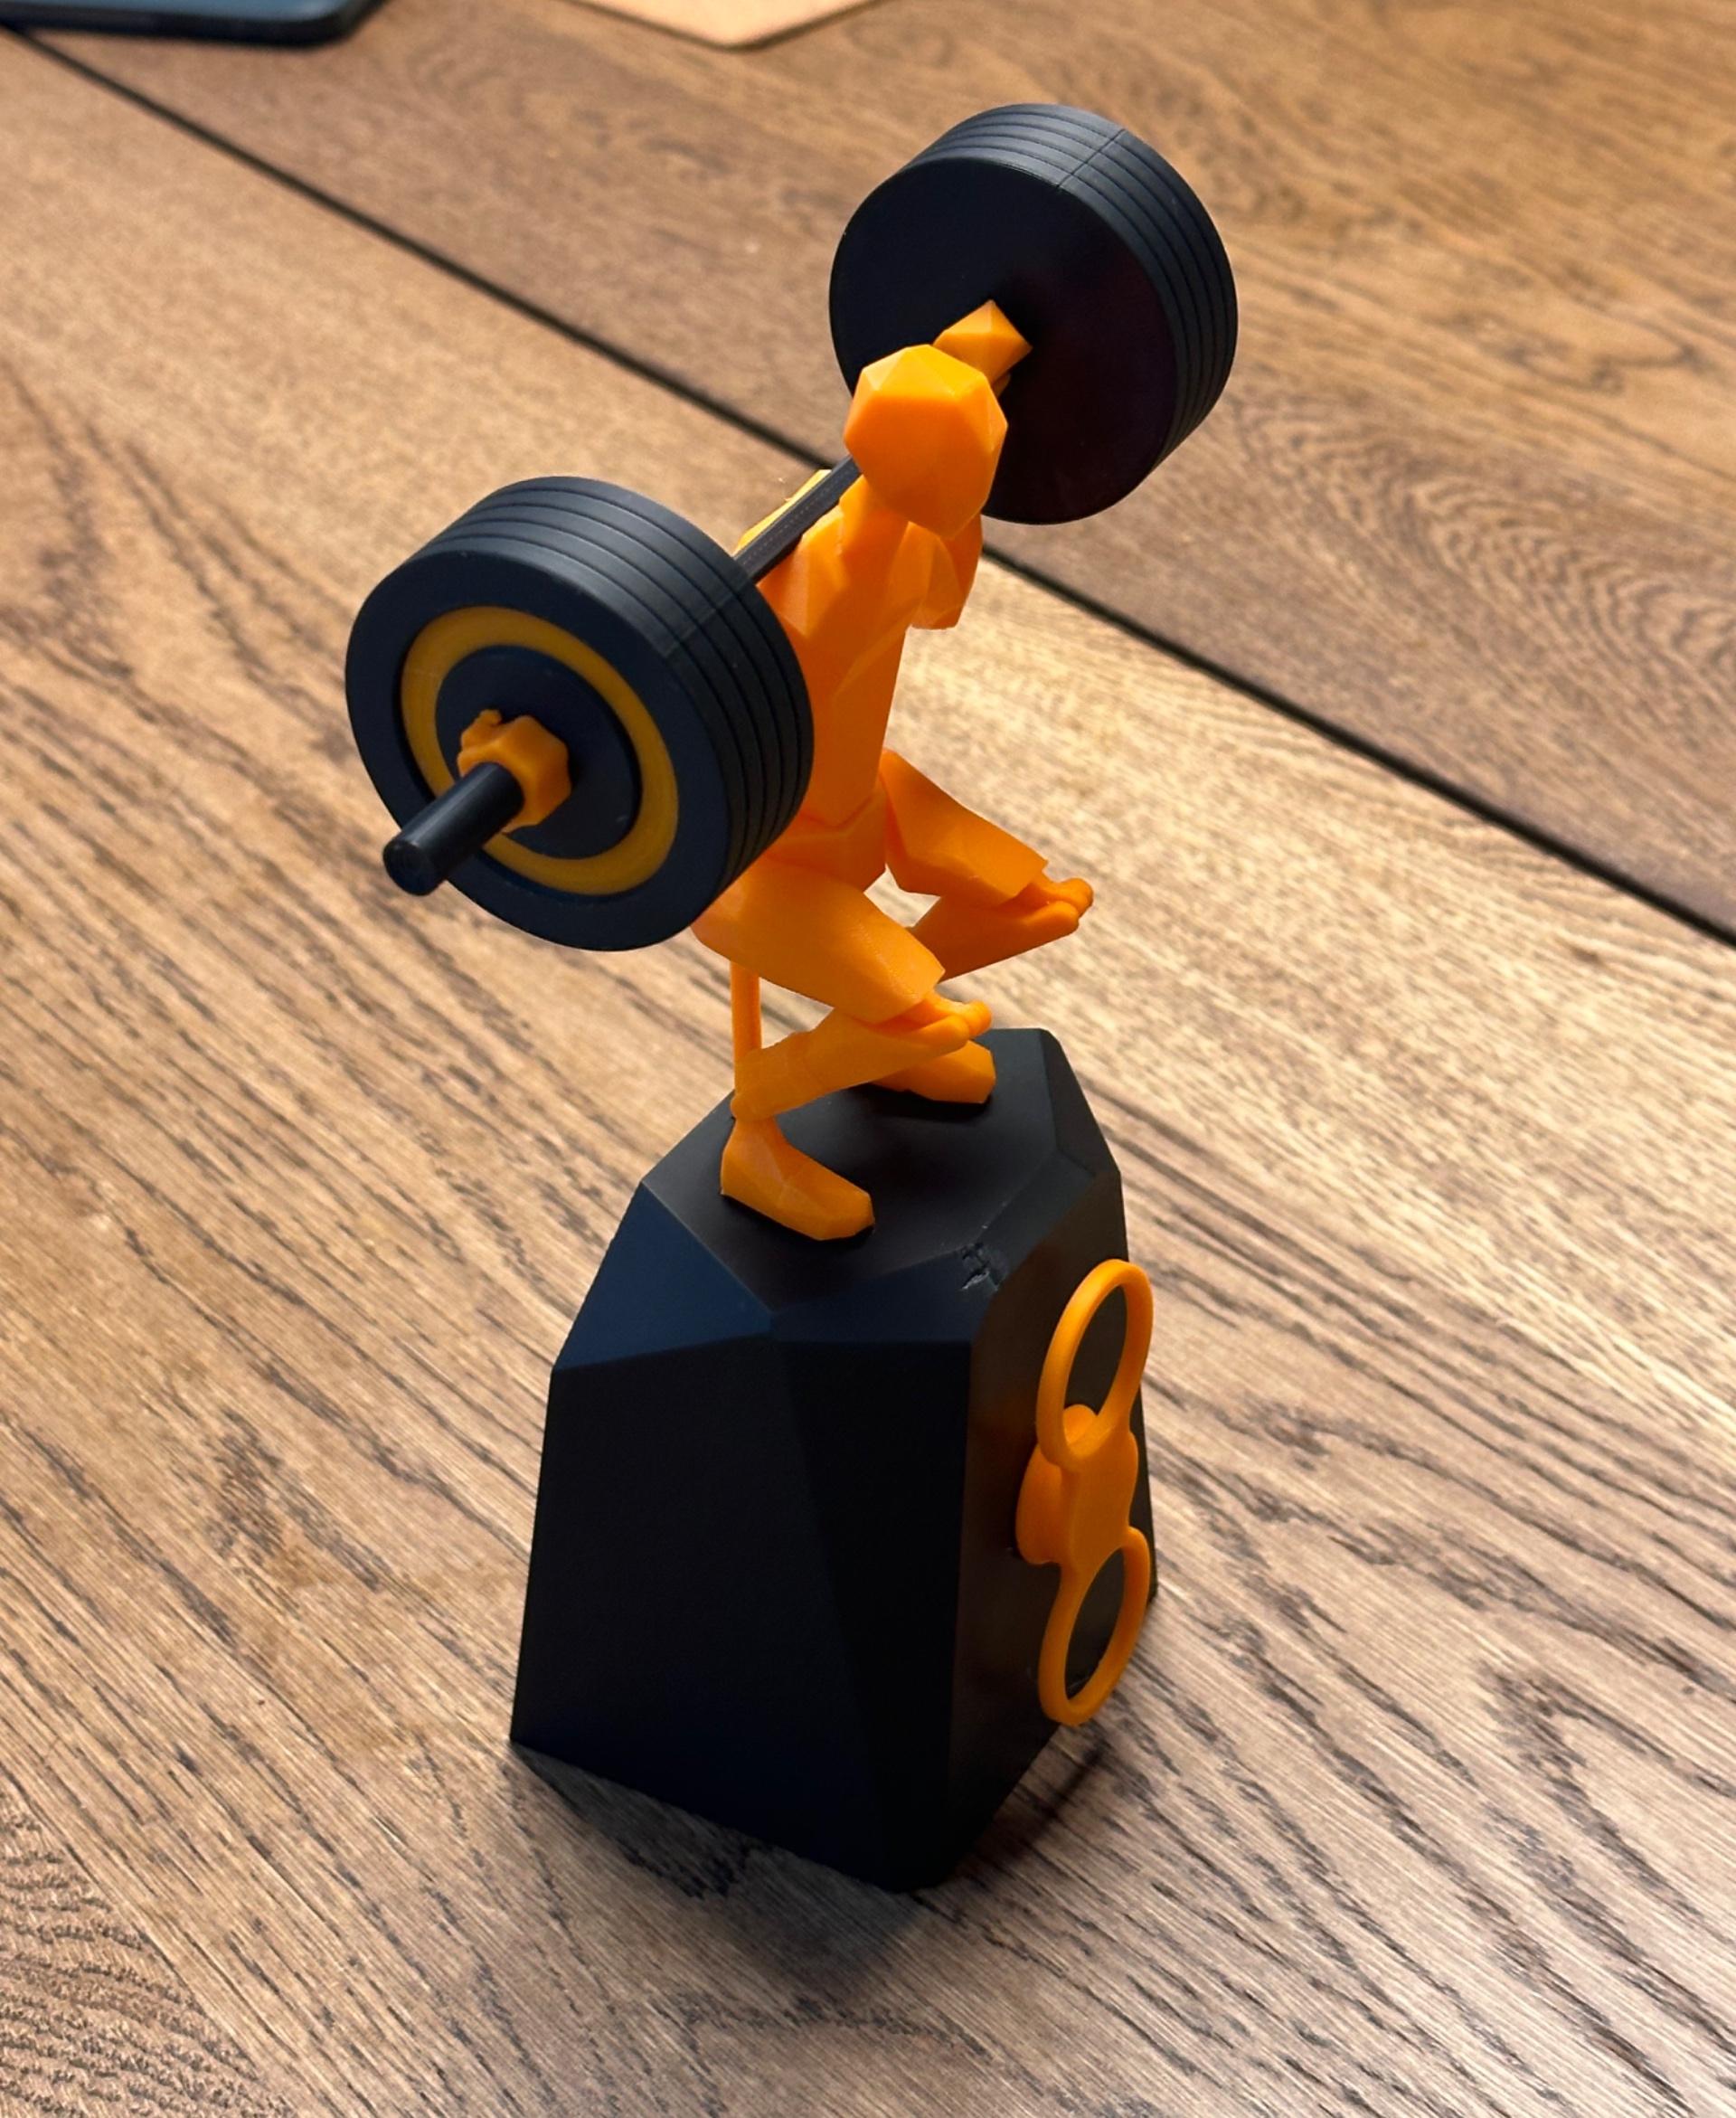 Squat Automata - Moving Sculpture - Printed on ender 3 in sunlu pla
Very fun model , really like it!  - 3d model